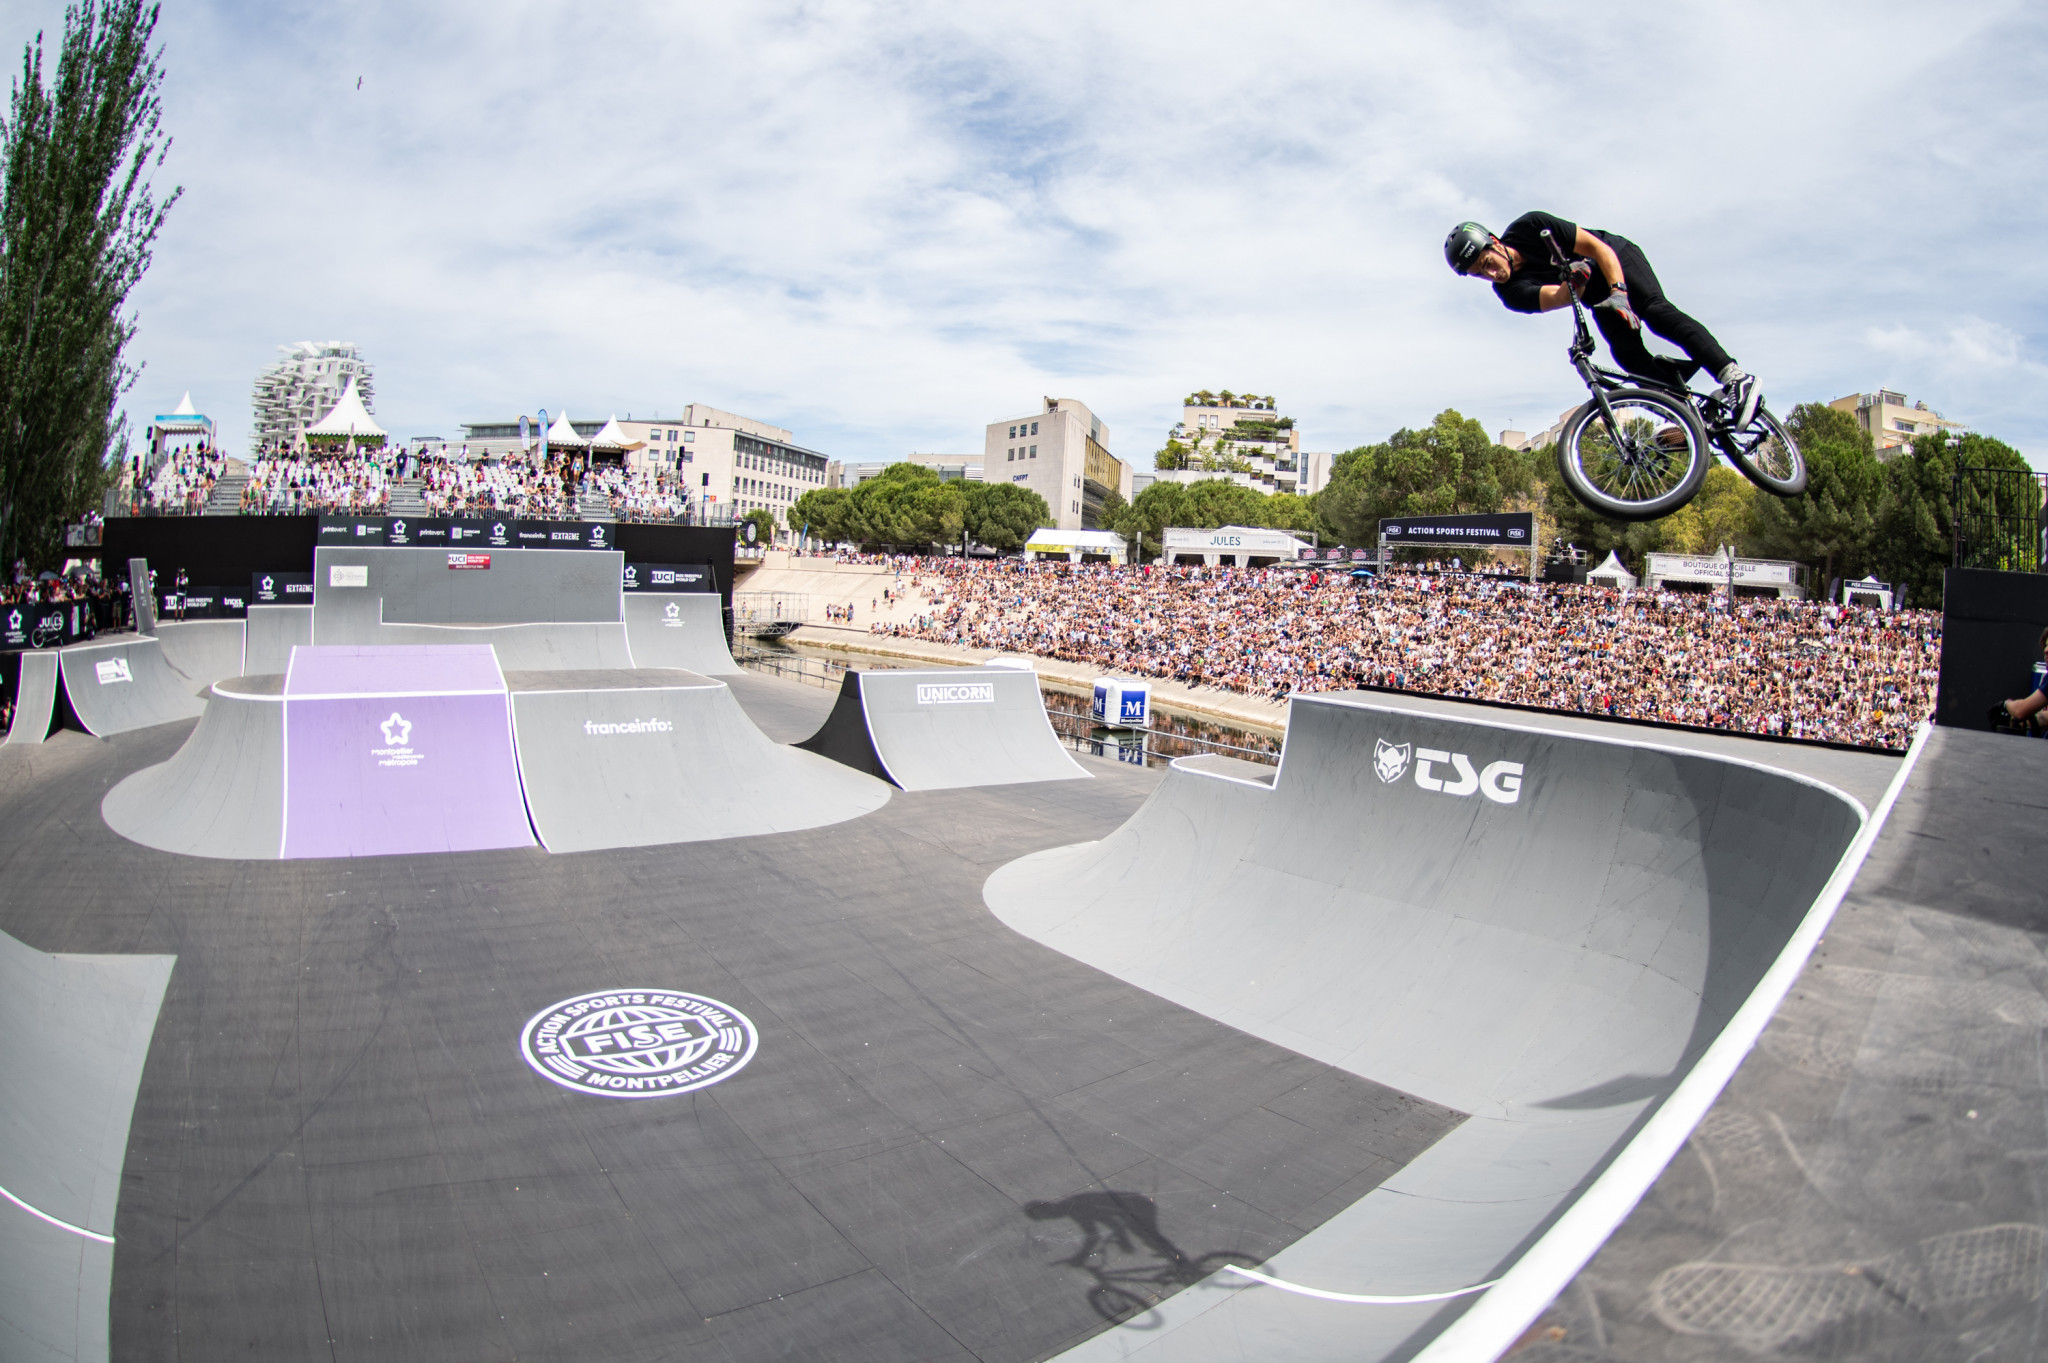 World class athletes, including Olympic champions, are drawn to FISE and its state-of-the-art yet temporary facilities ©Hurricane - FISE